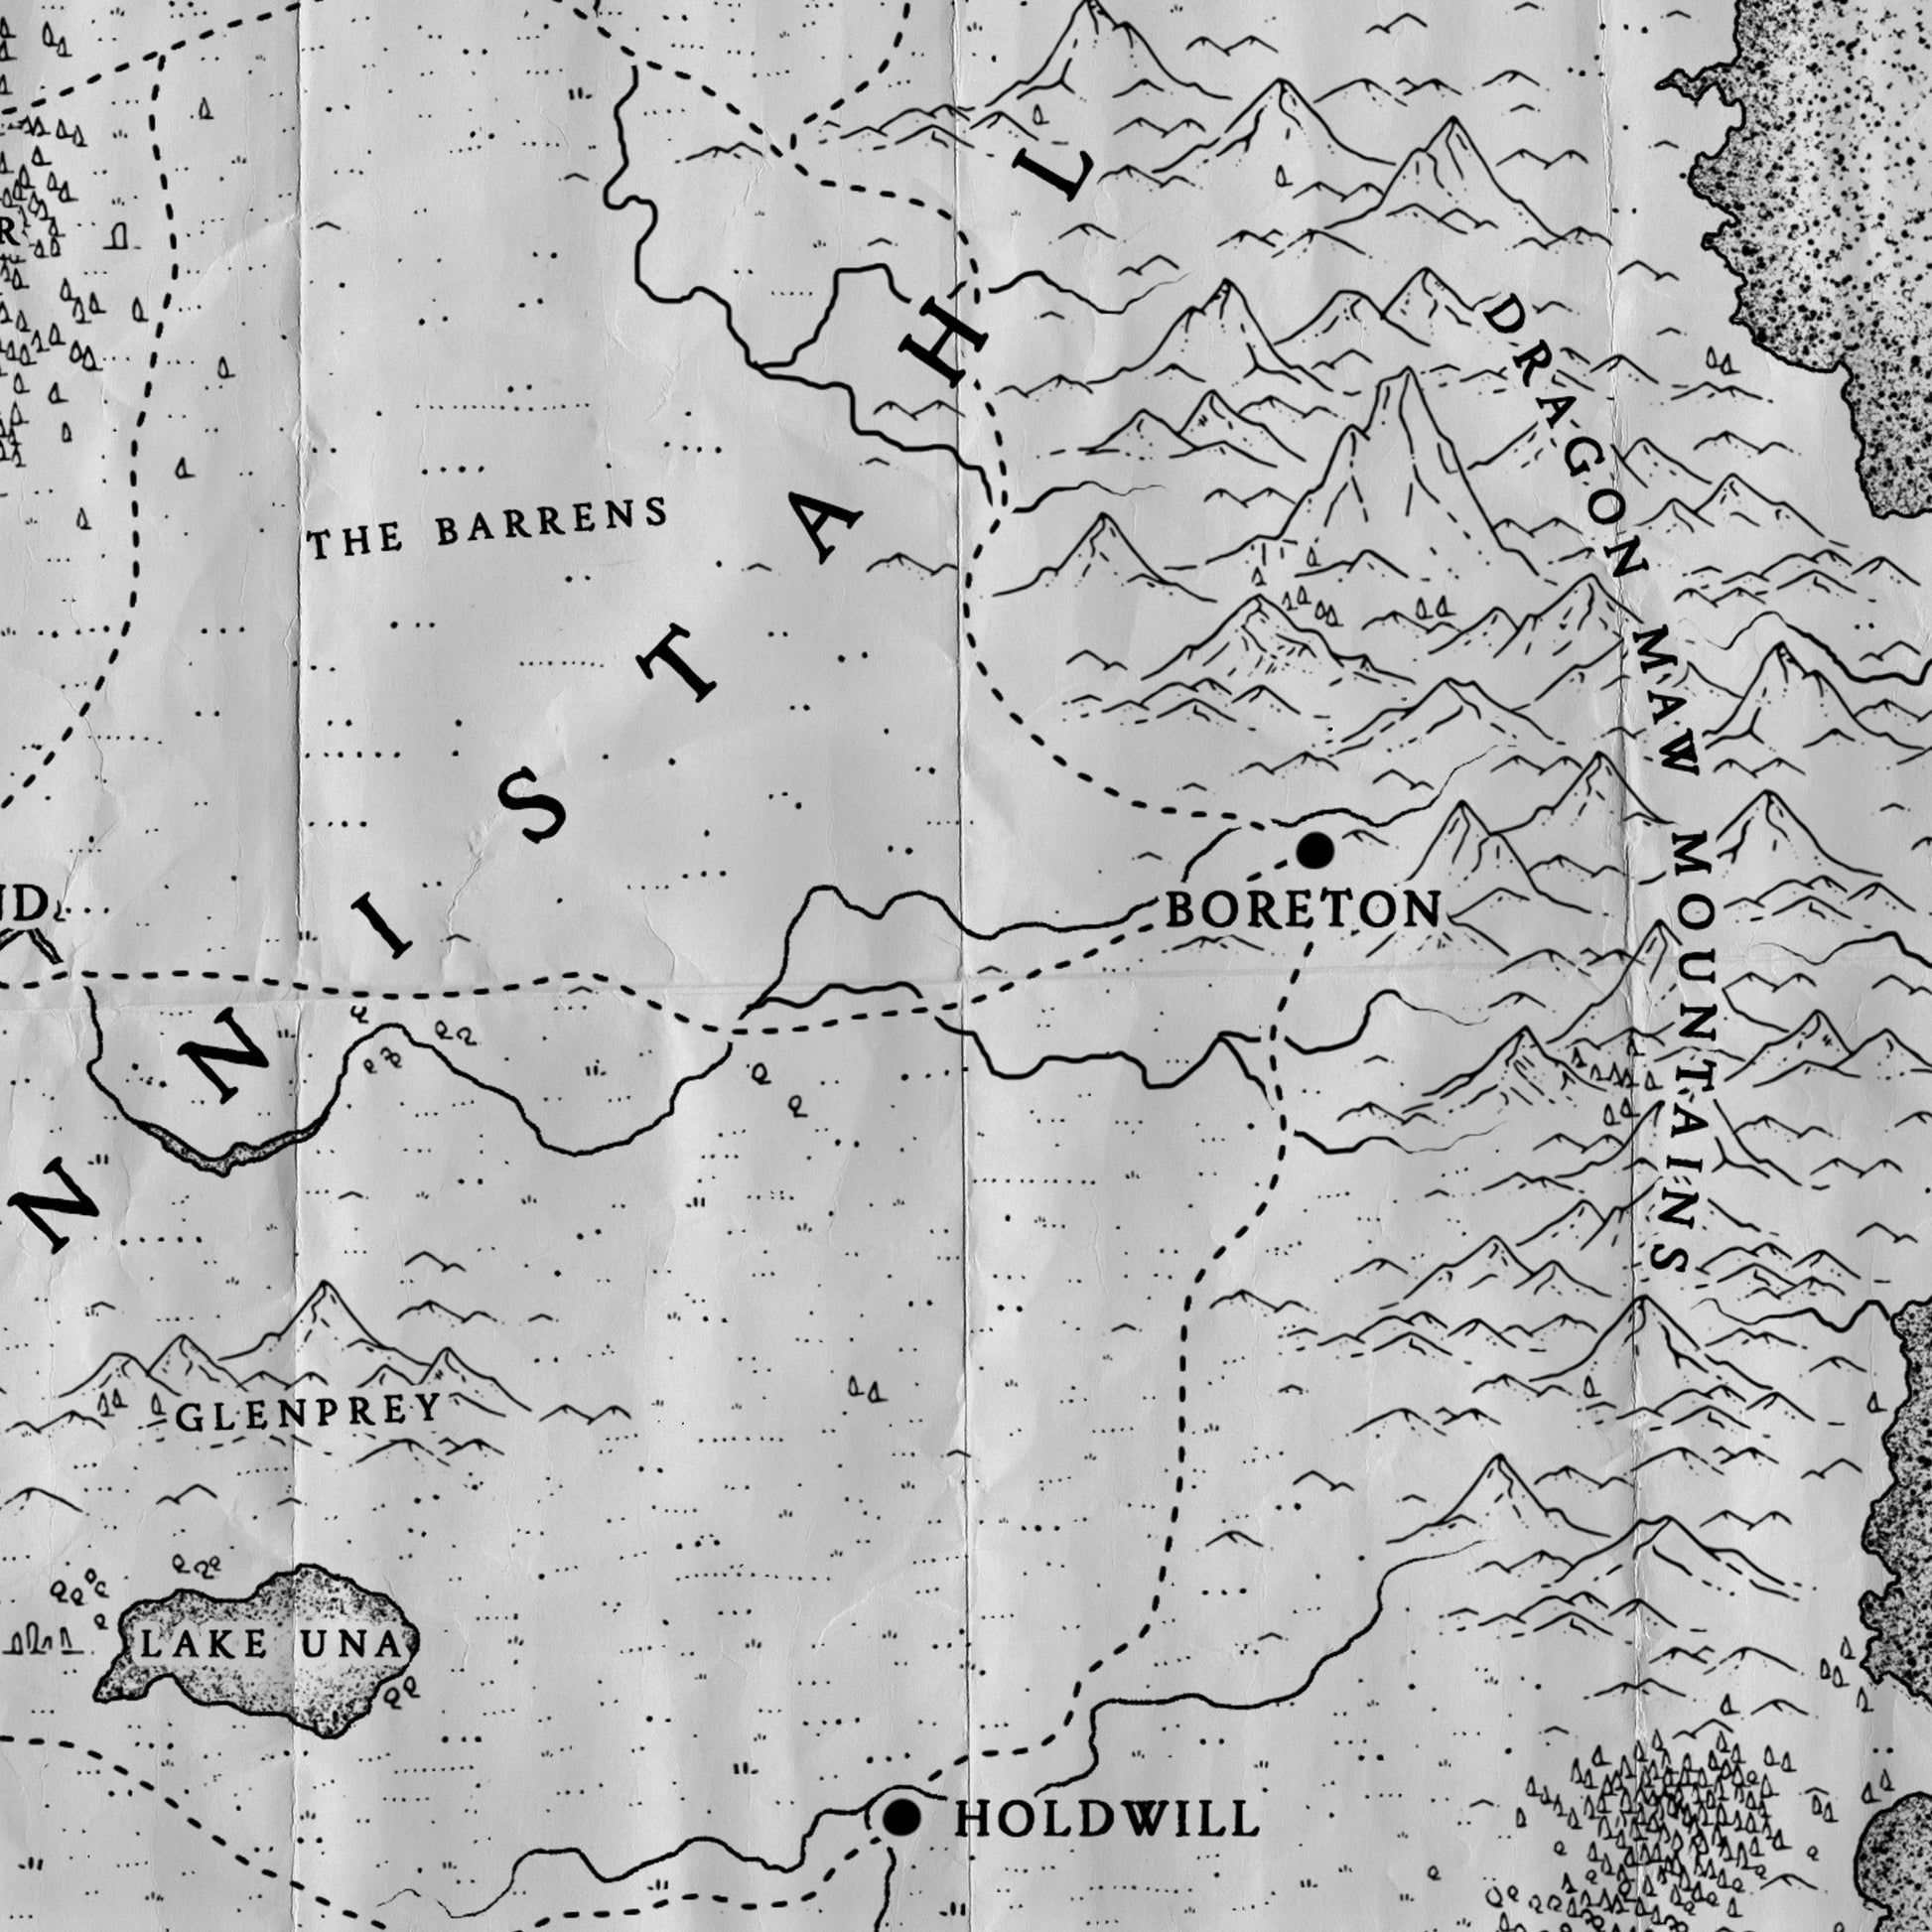 details of illustrated black and white line work map, created with worldcrafter